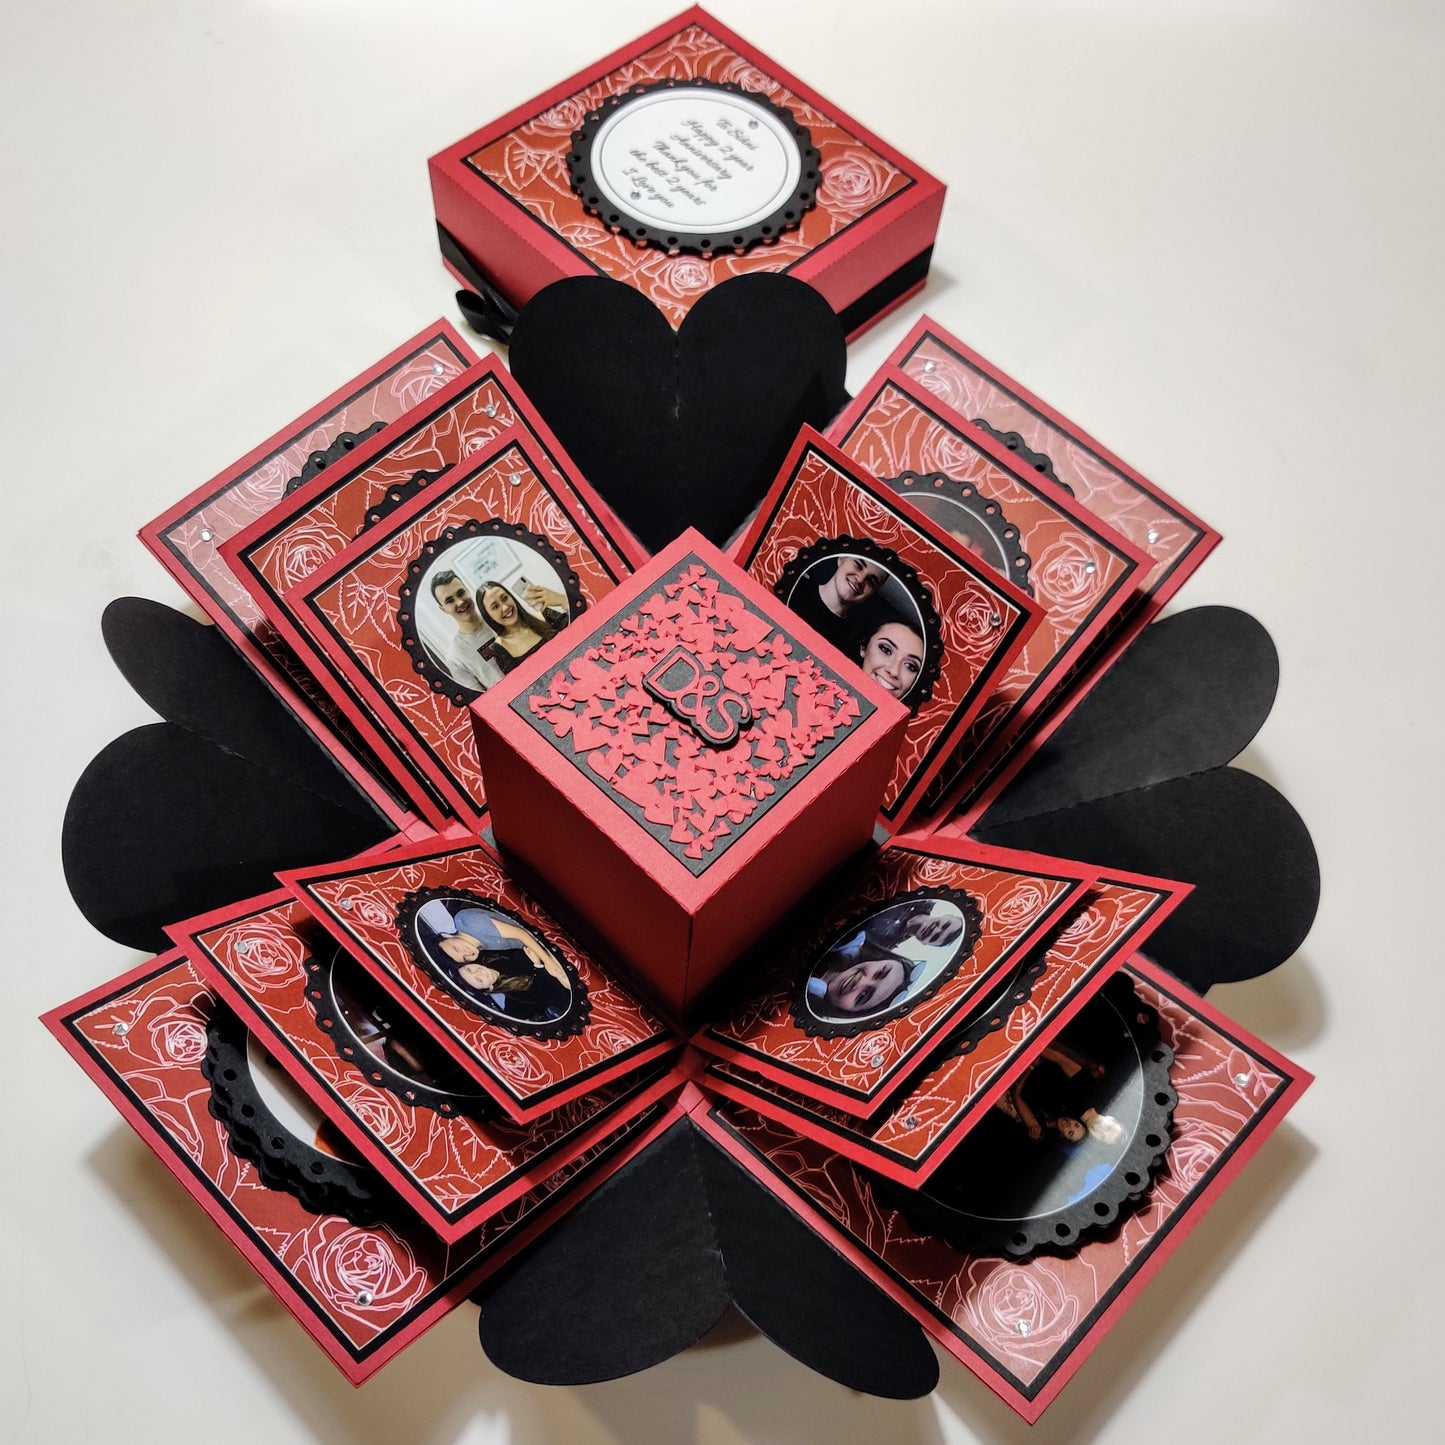 Red-Roses-with-Black-Hearts-Marriage-Proposal-Photo-and-Ring-Box-Exploding-Box-Co